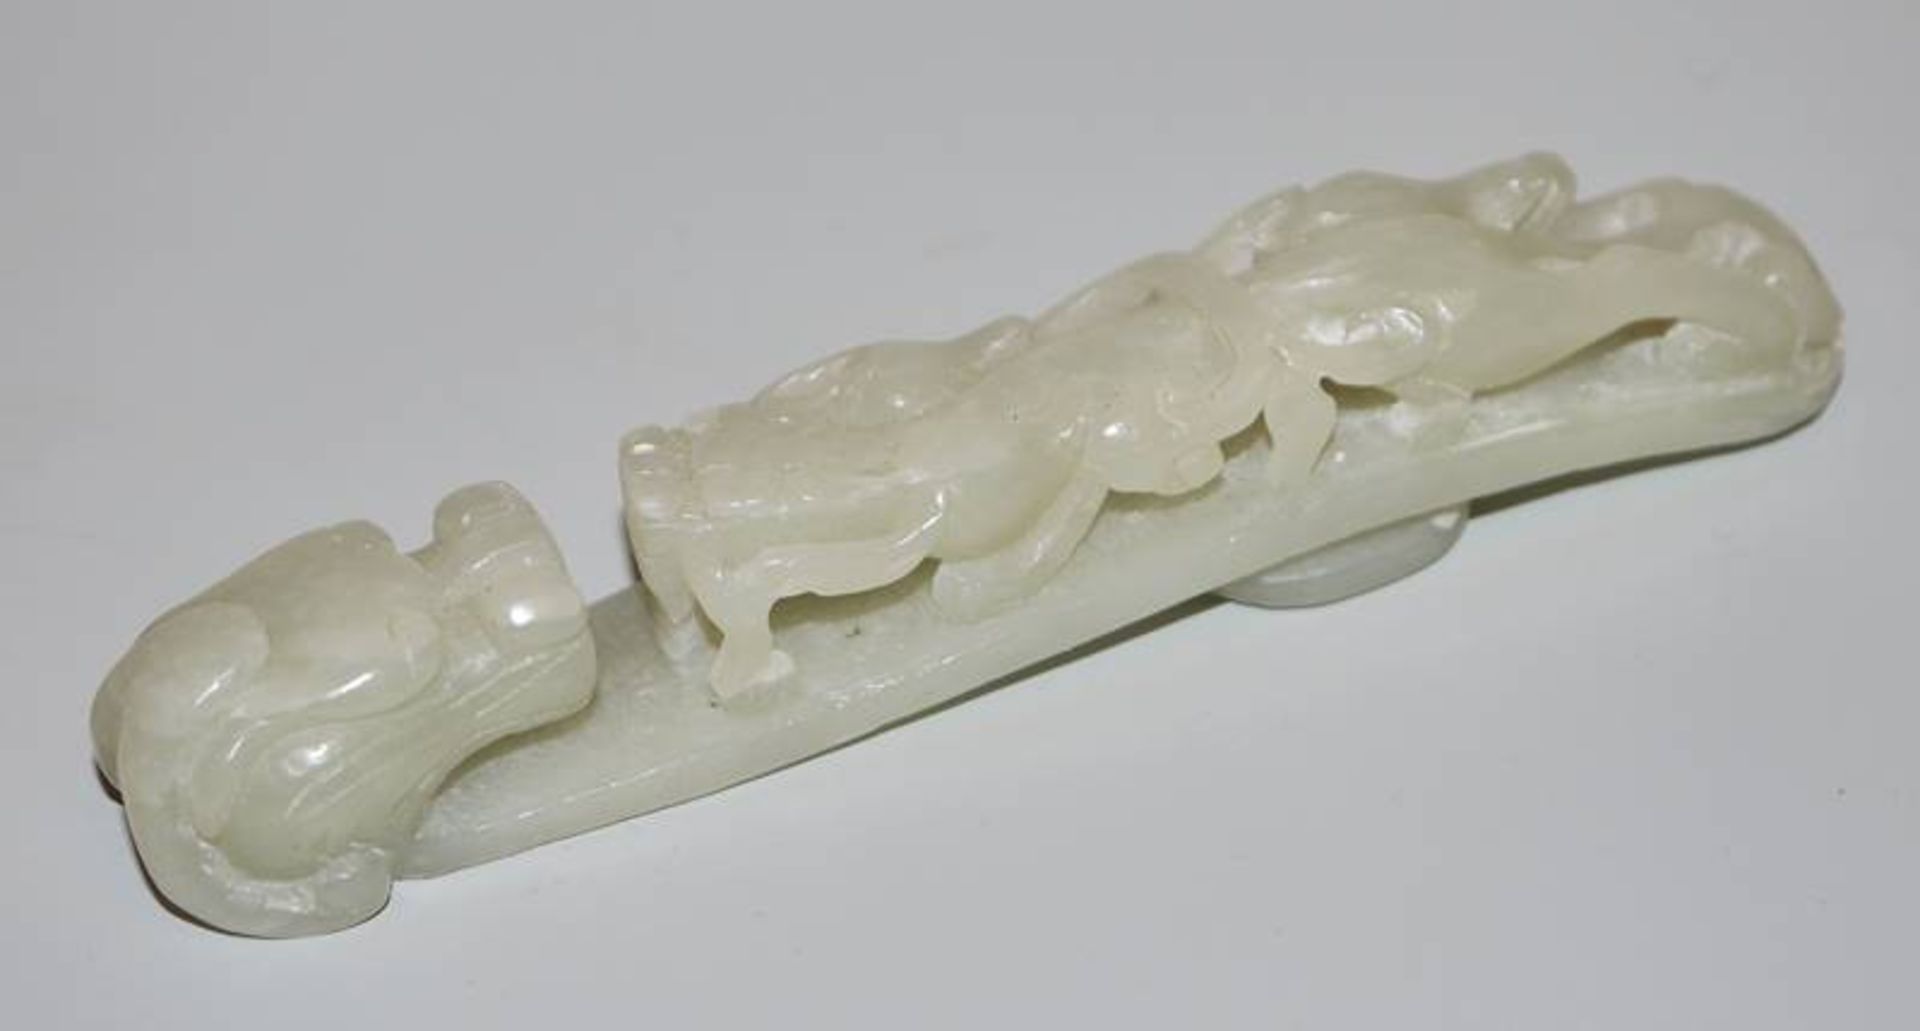 Jade belt hook, China, probably Qing period 18th/19th century - Image 2 of 3